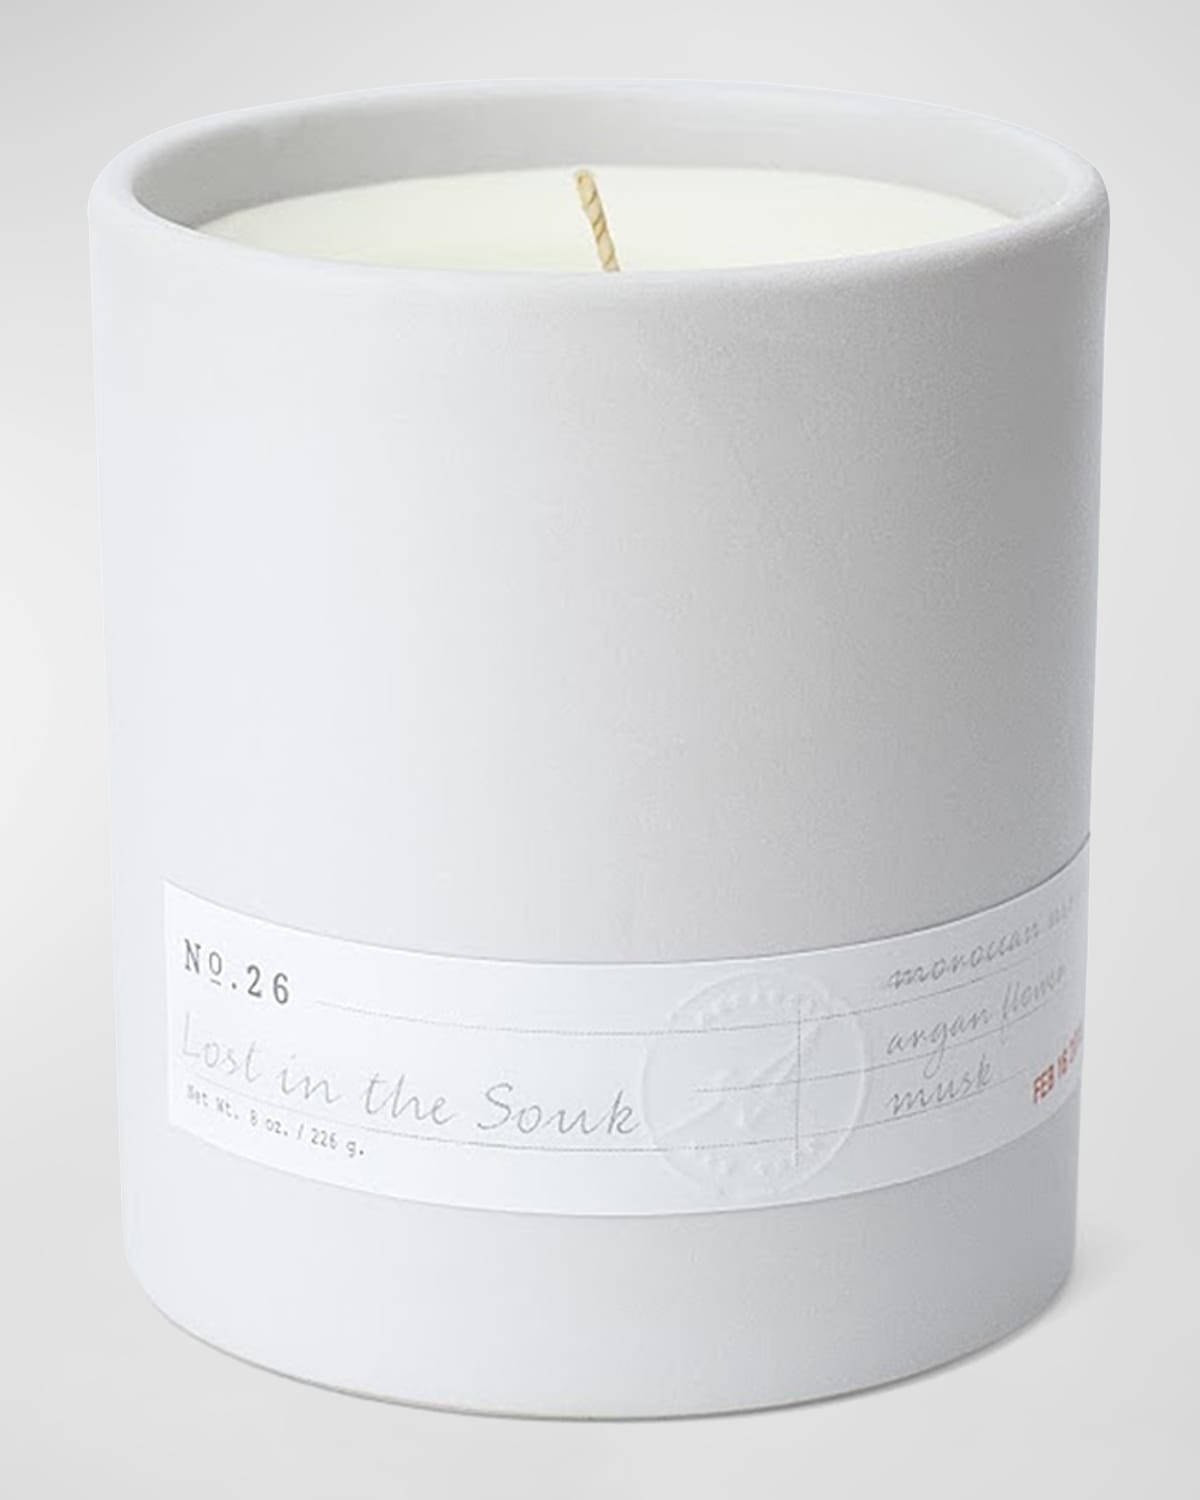 Aerangis No. 26 Lost In The Souk Scented Candle, 8 oz In Gray